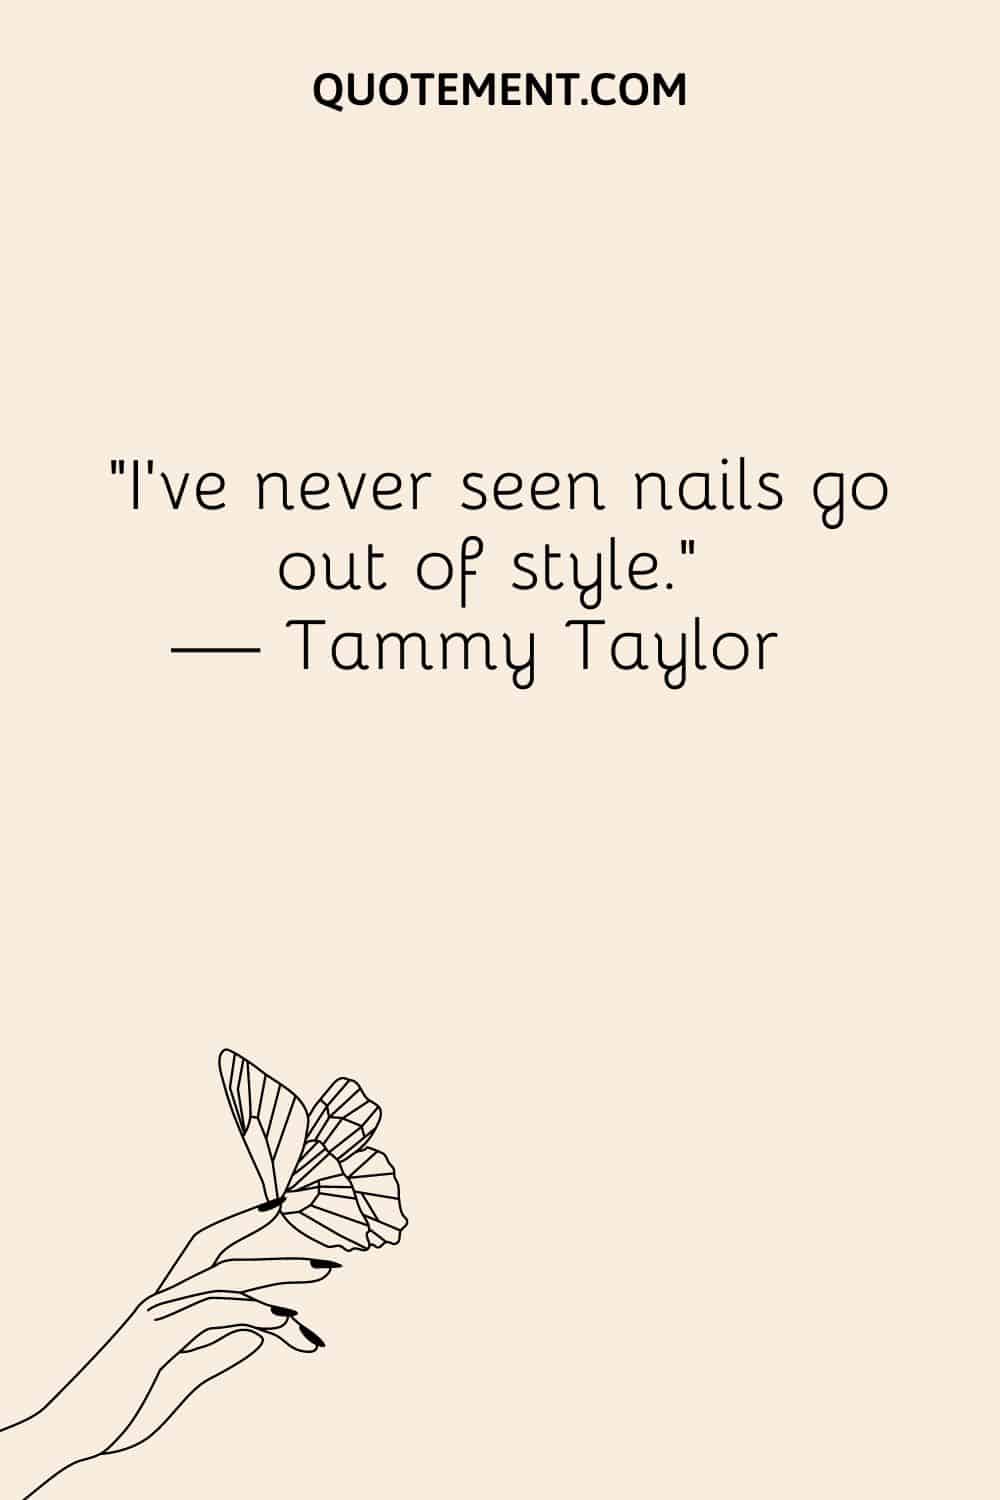 butterfly on a woman hand illustration representing nail quote (2)